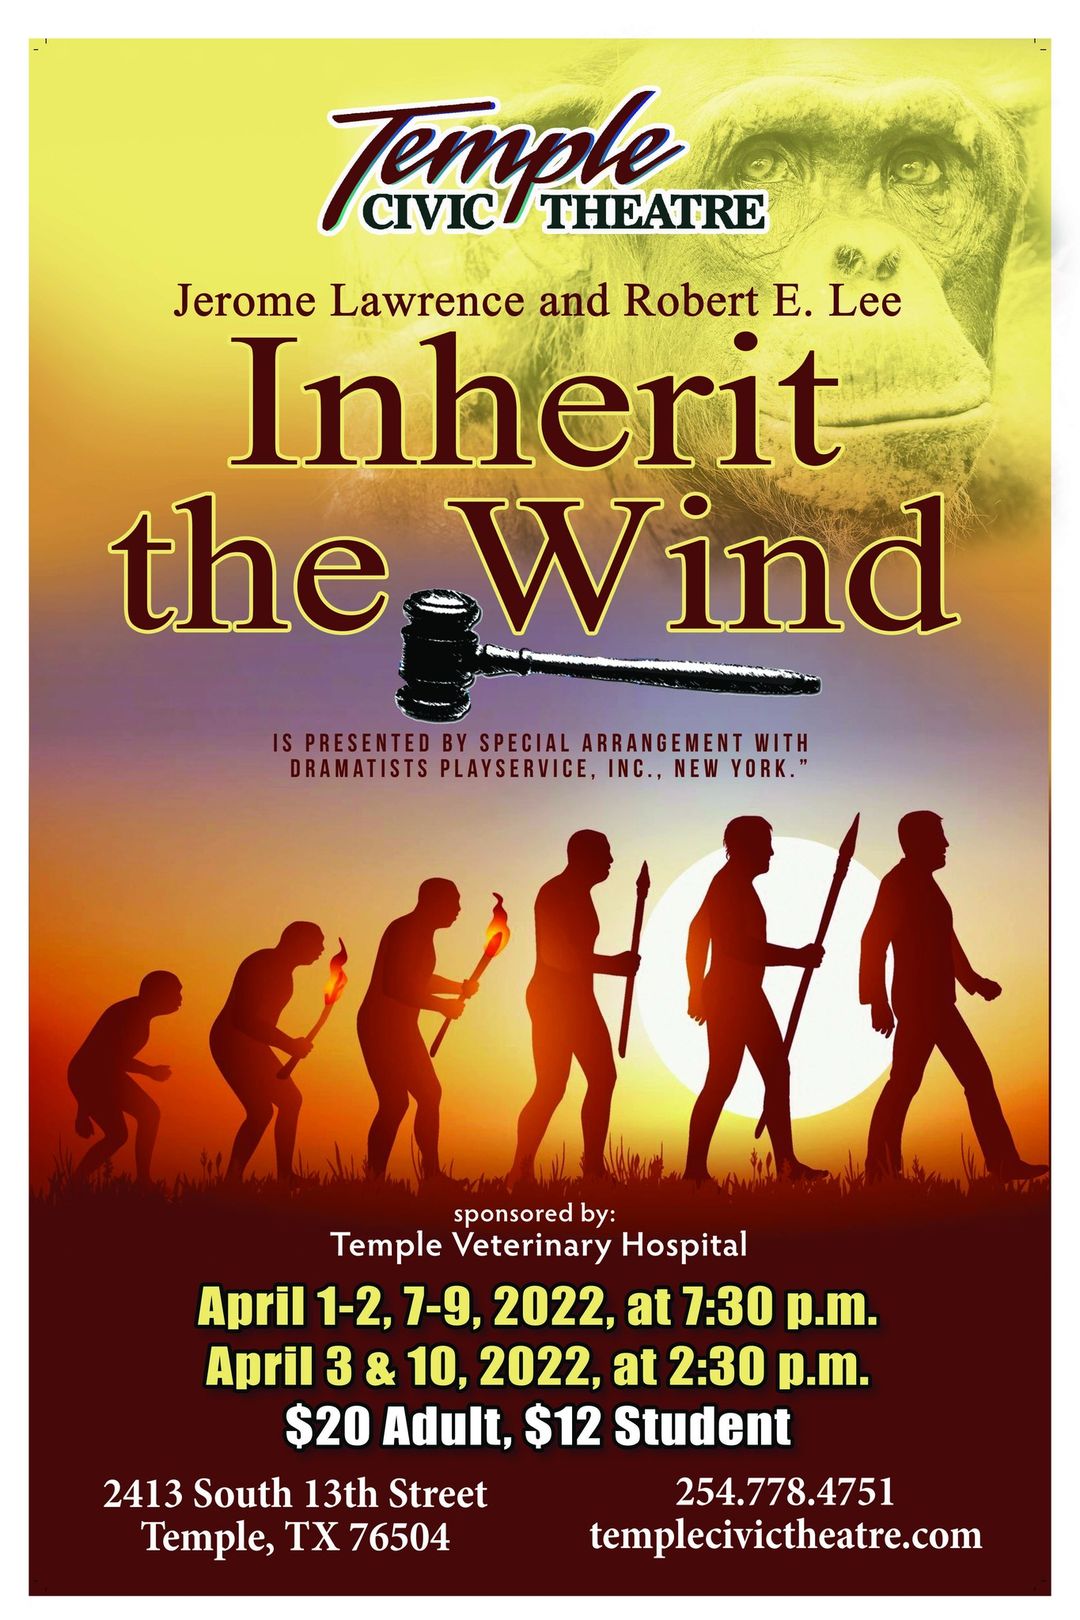 Inherit the Wind by Temple Civic Theatre